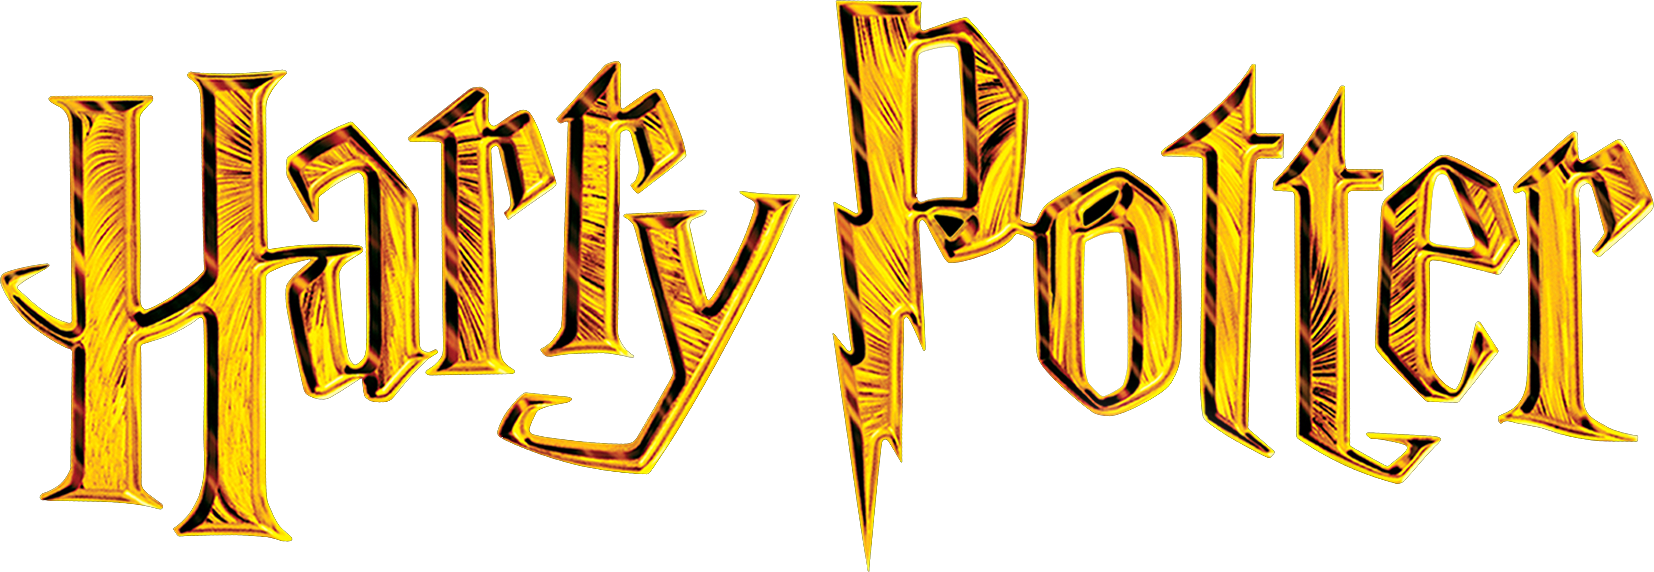 Download Image - HarryPotter.png | Logopedia | FANDOM powered by Wikia